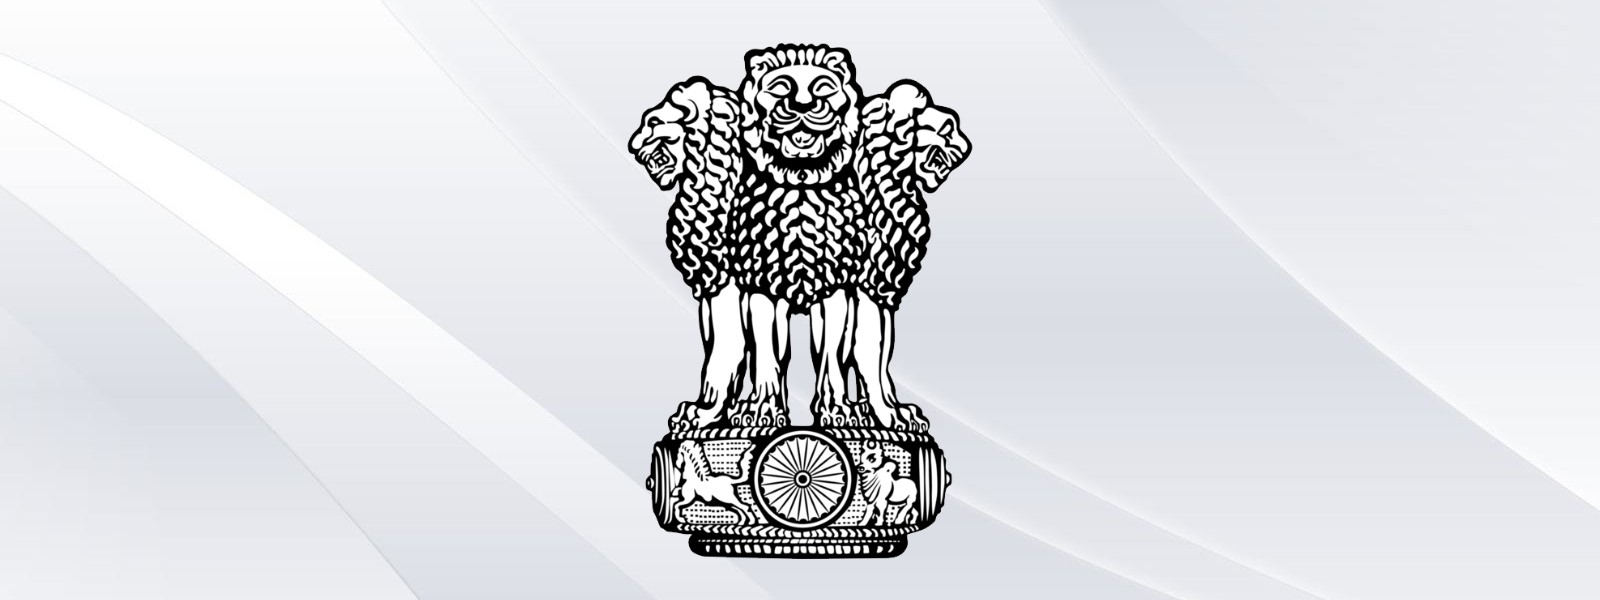 Indian HC in three high-level meetings in Colombo